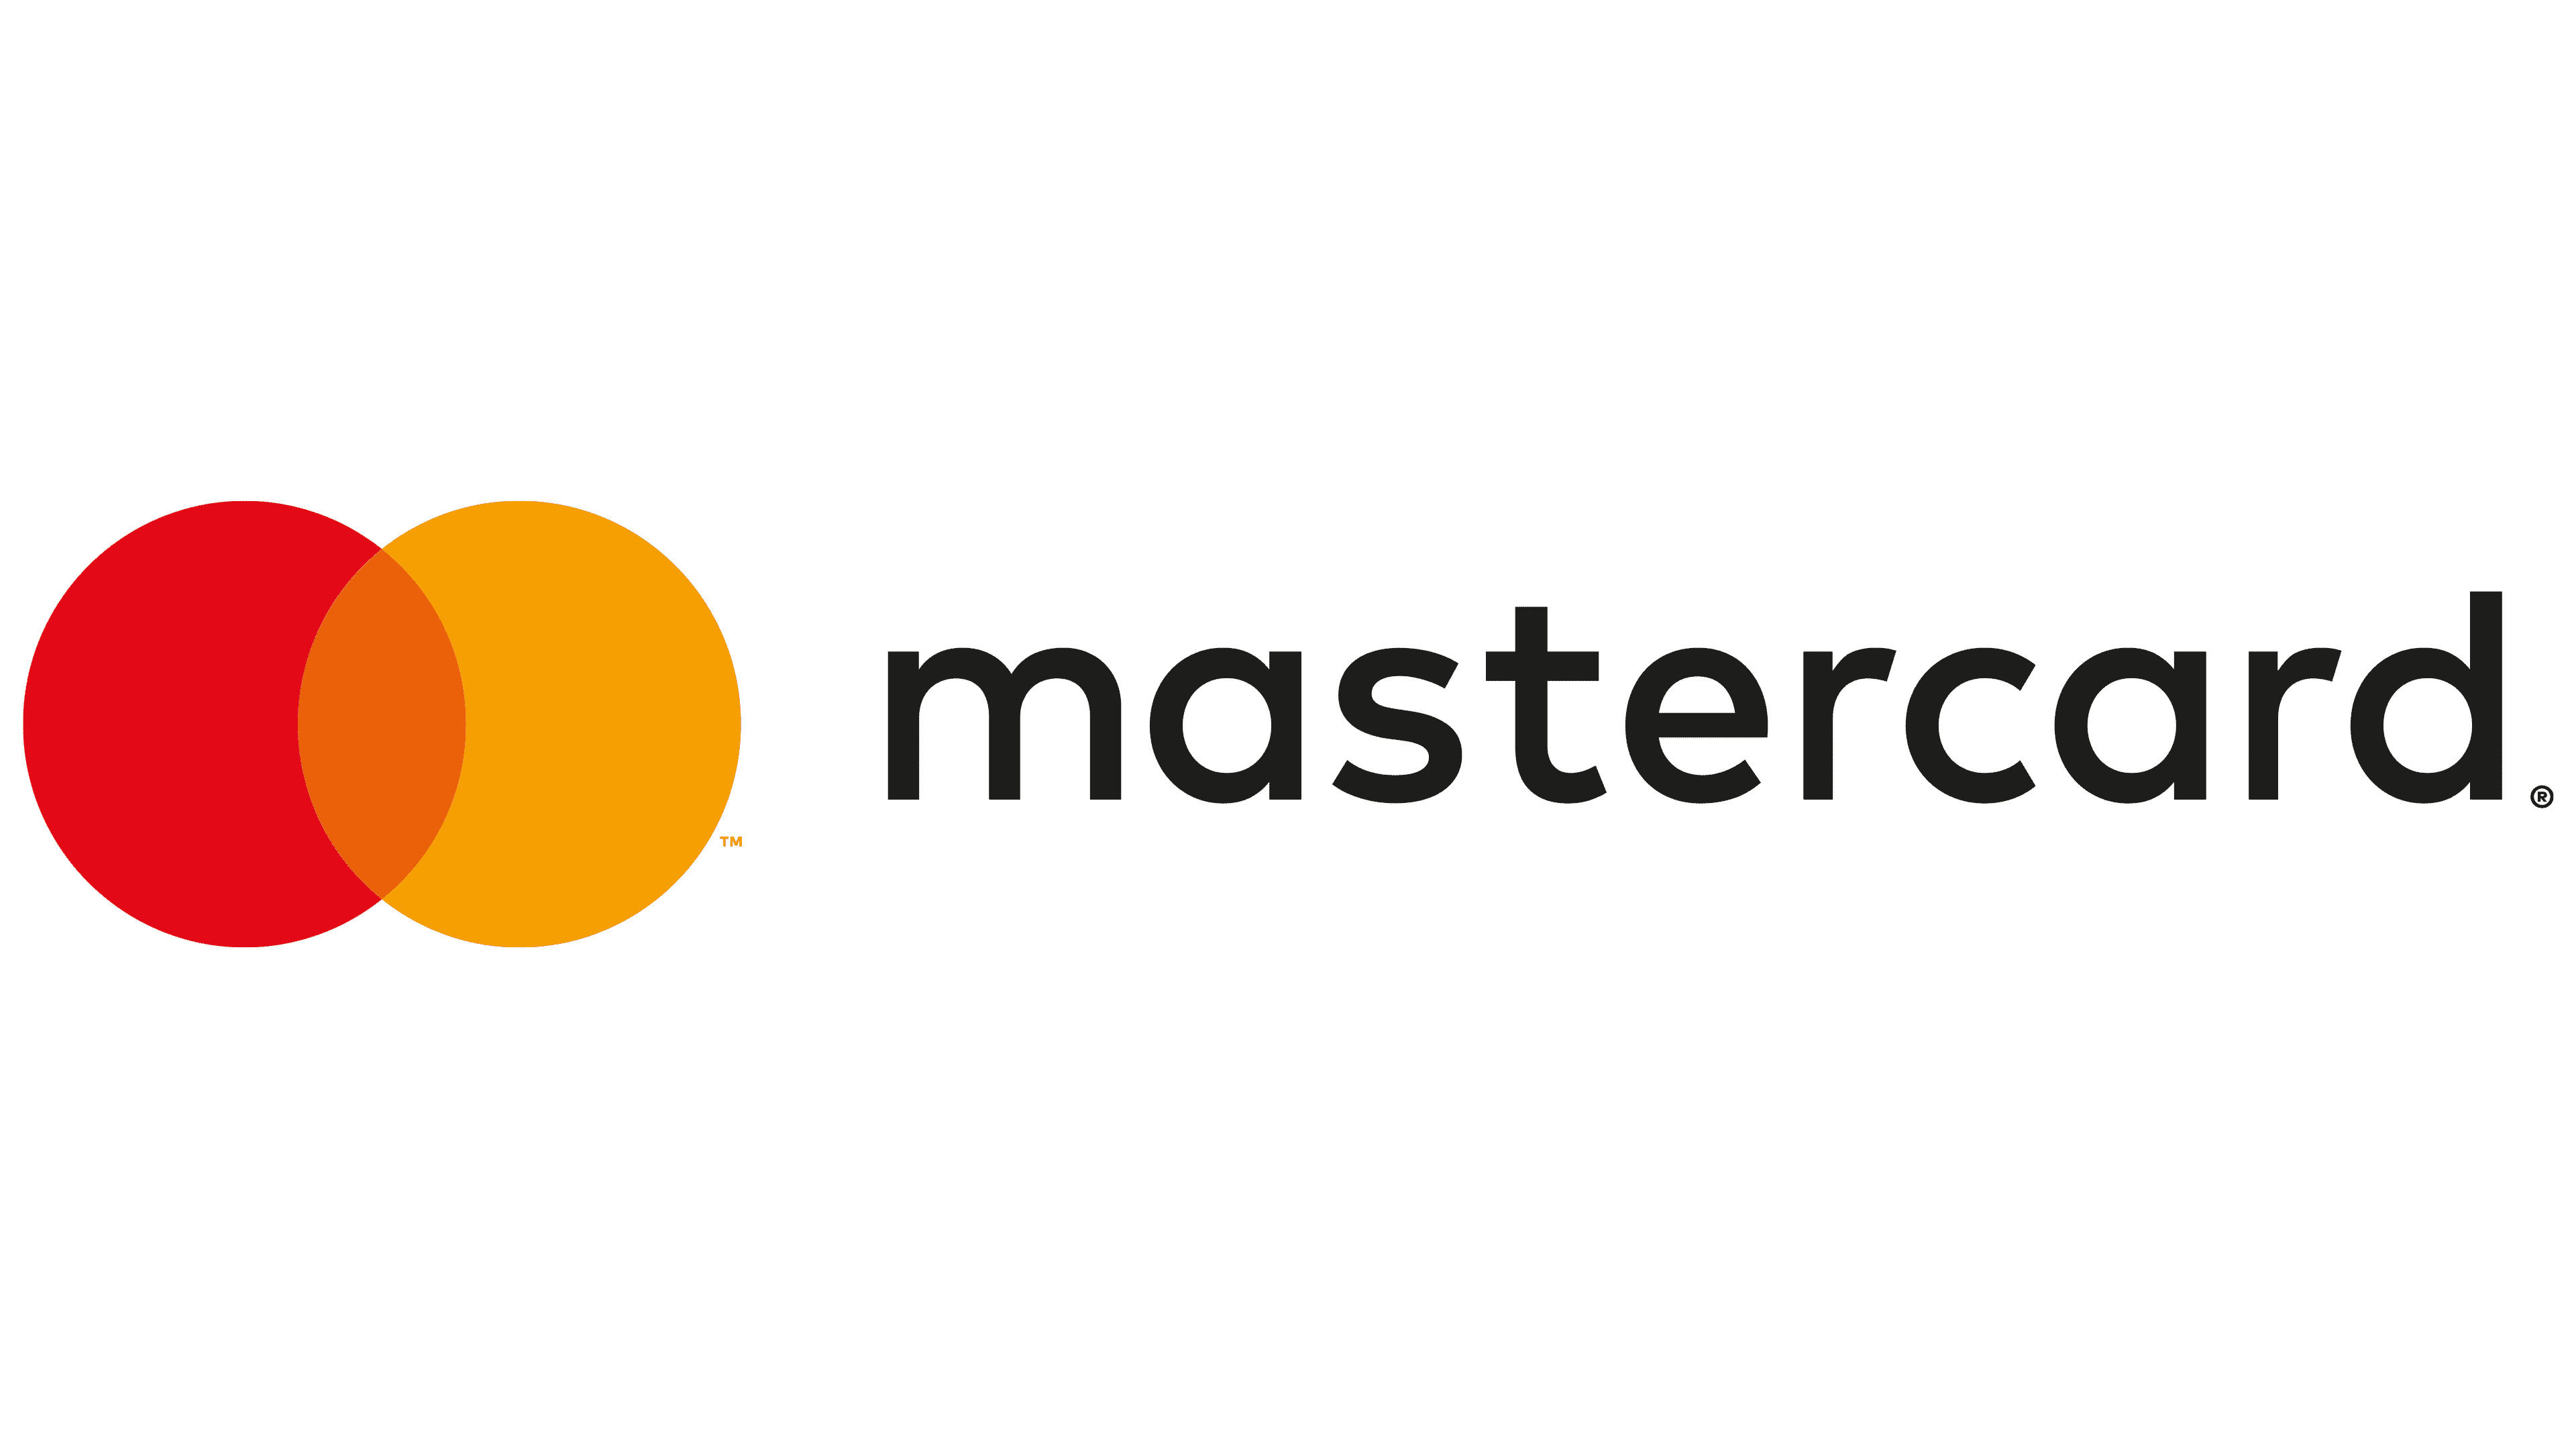 Mastercard: An American multinational financial services corporation, Purchase, New York. 3840x2160 4K Background.